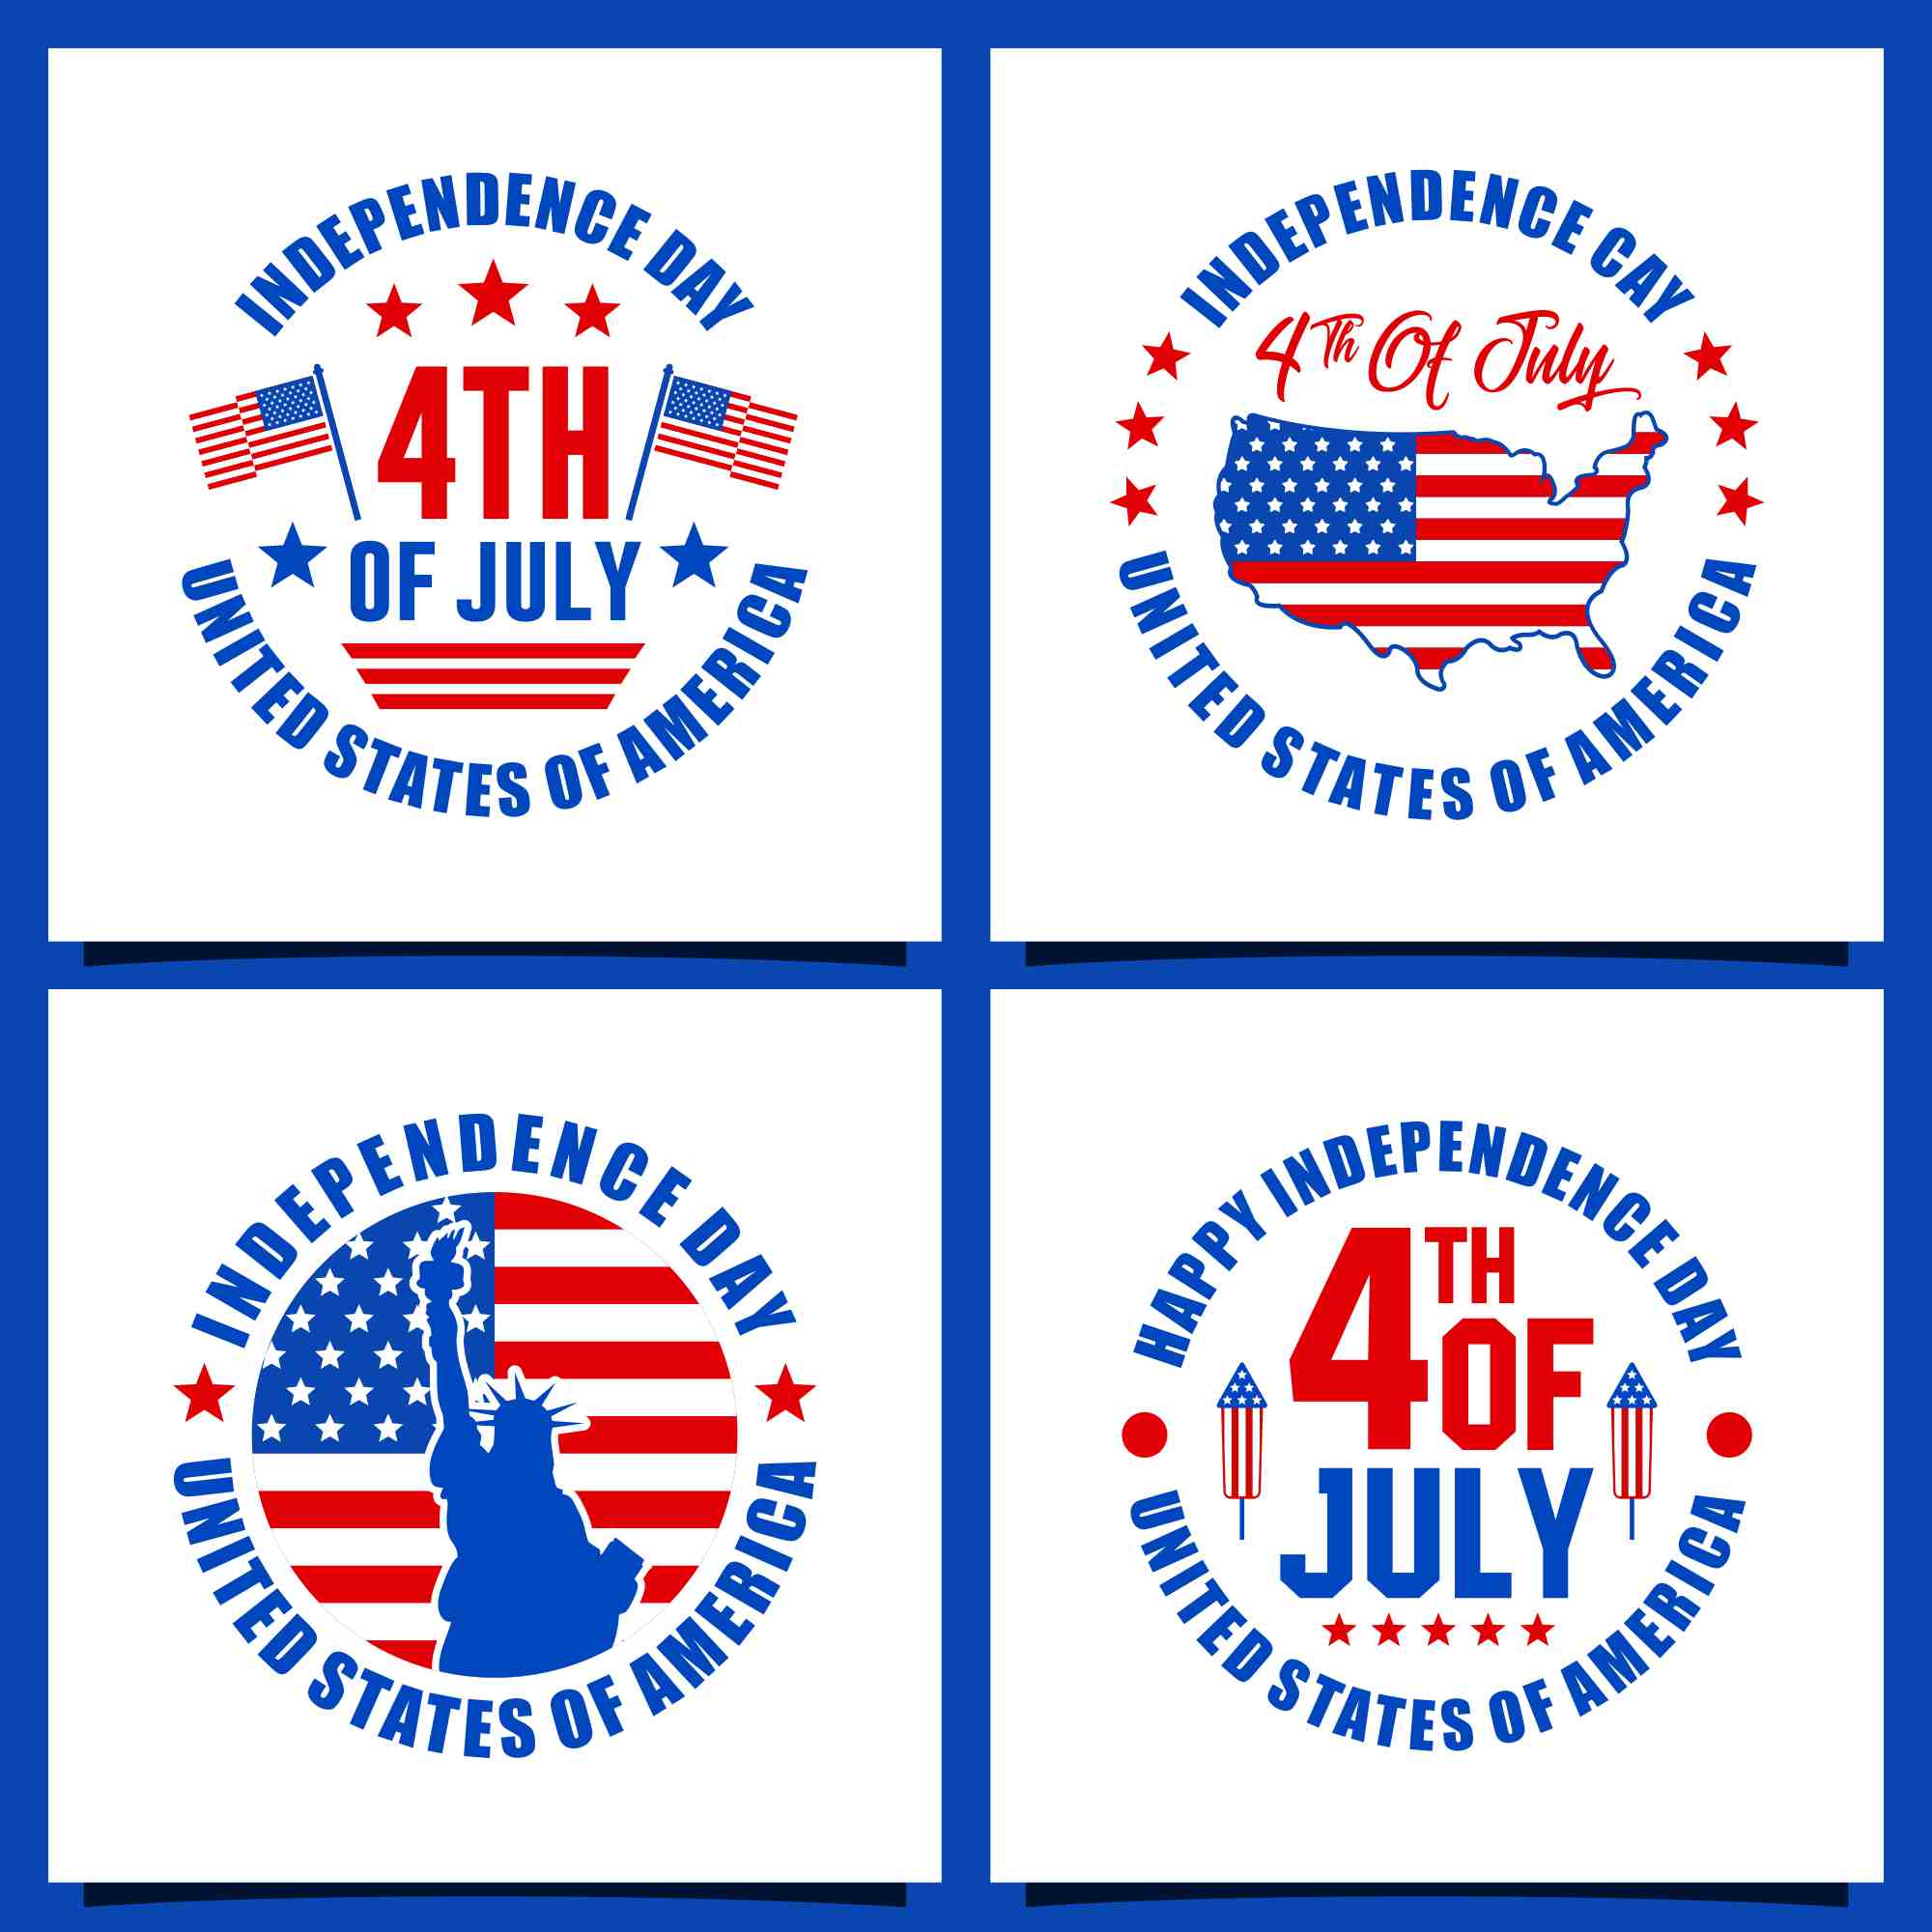 independence day 4 th july united states 6 553